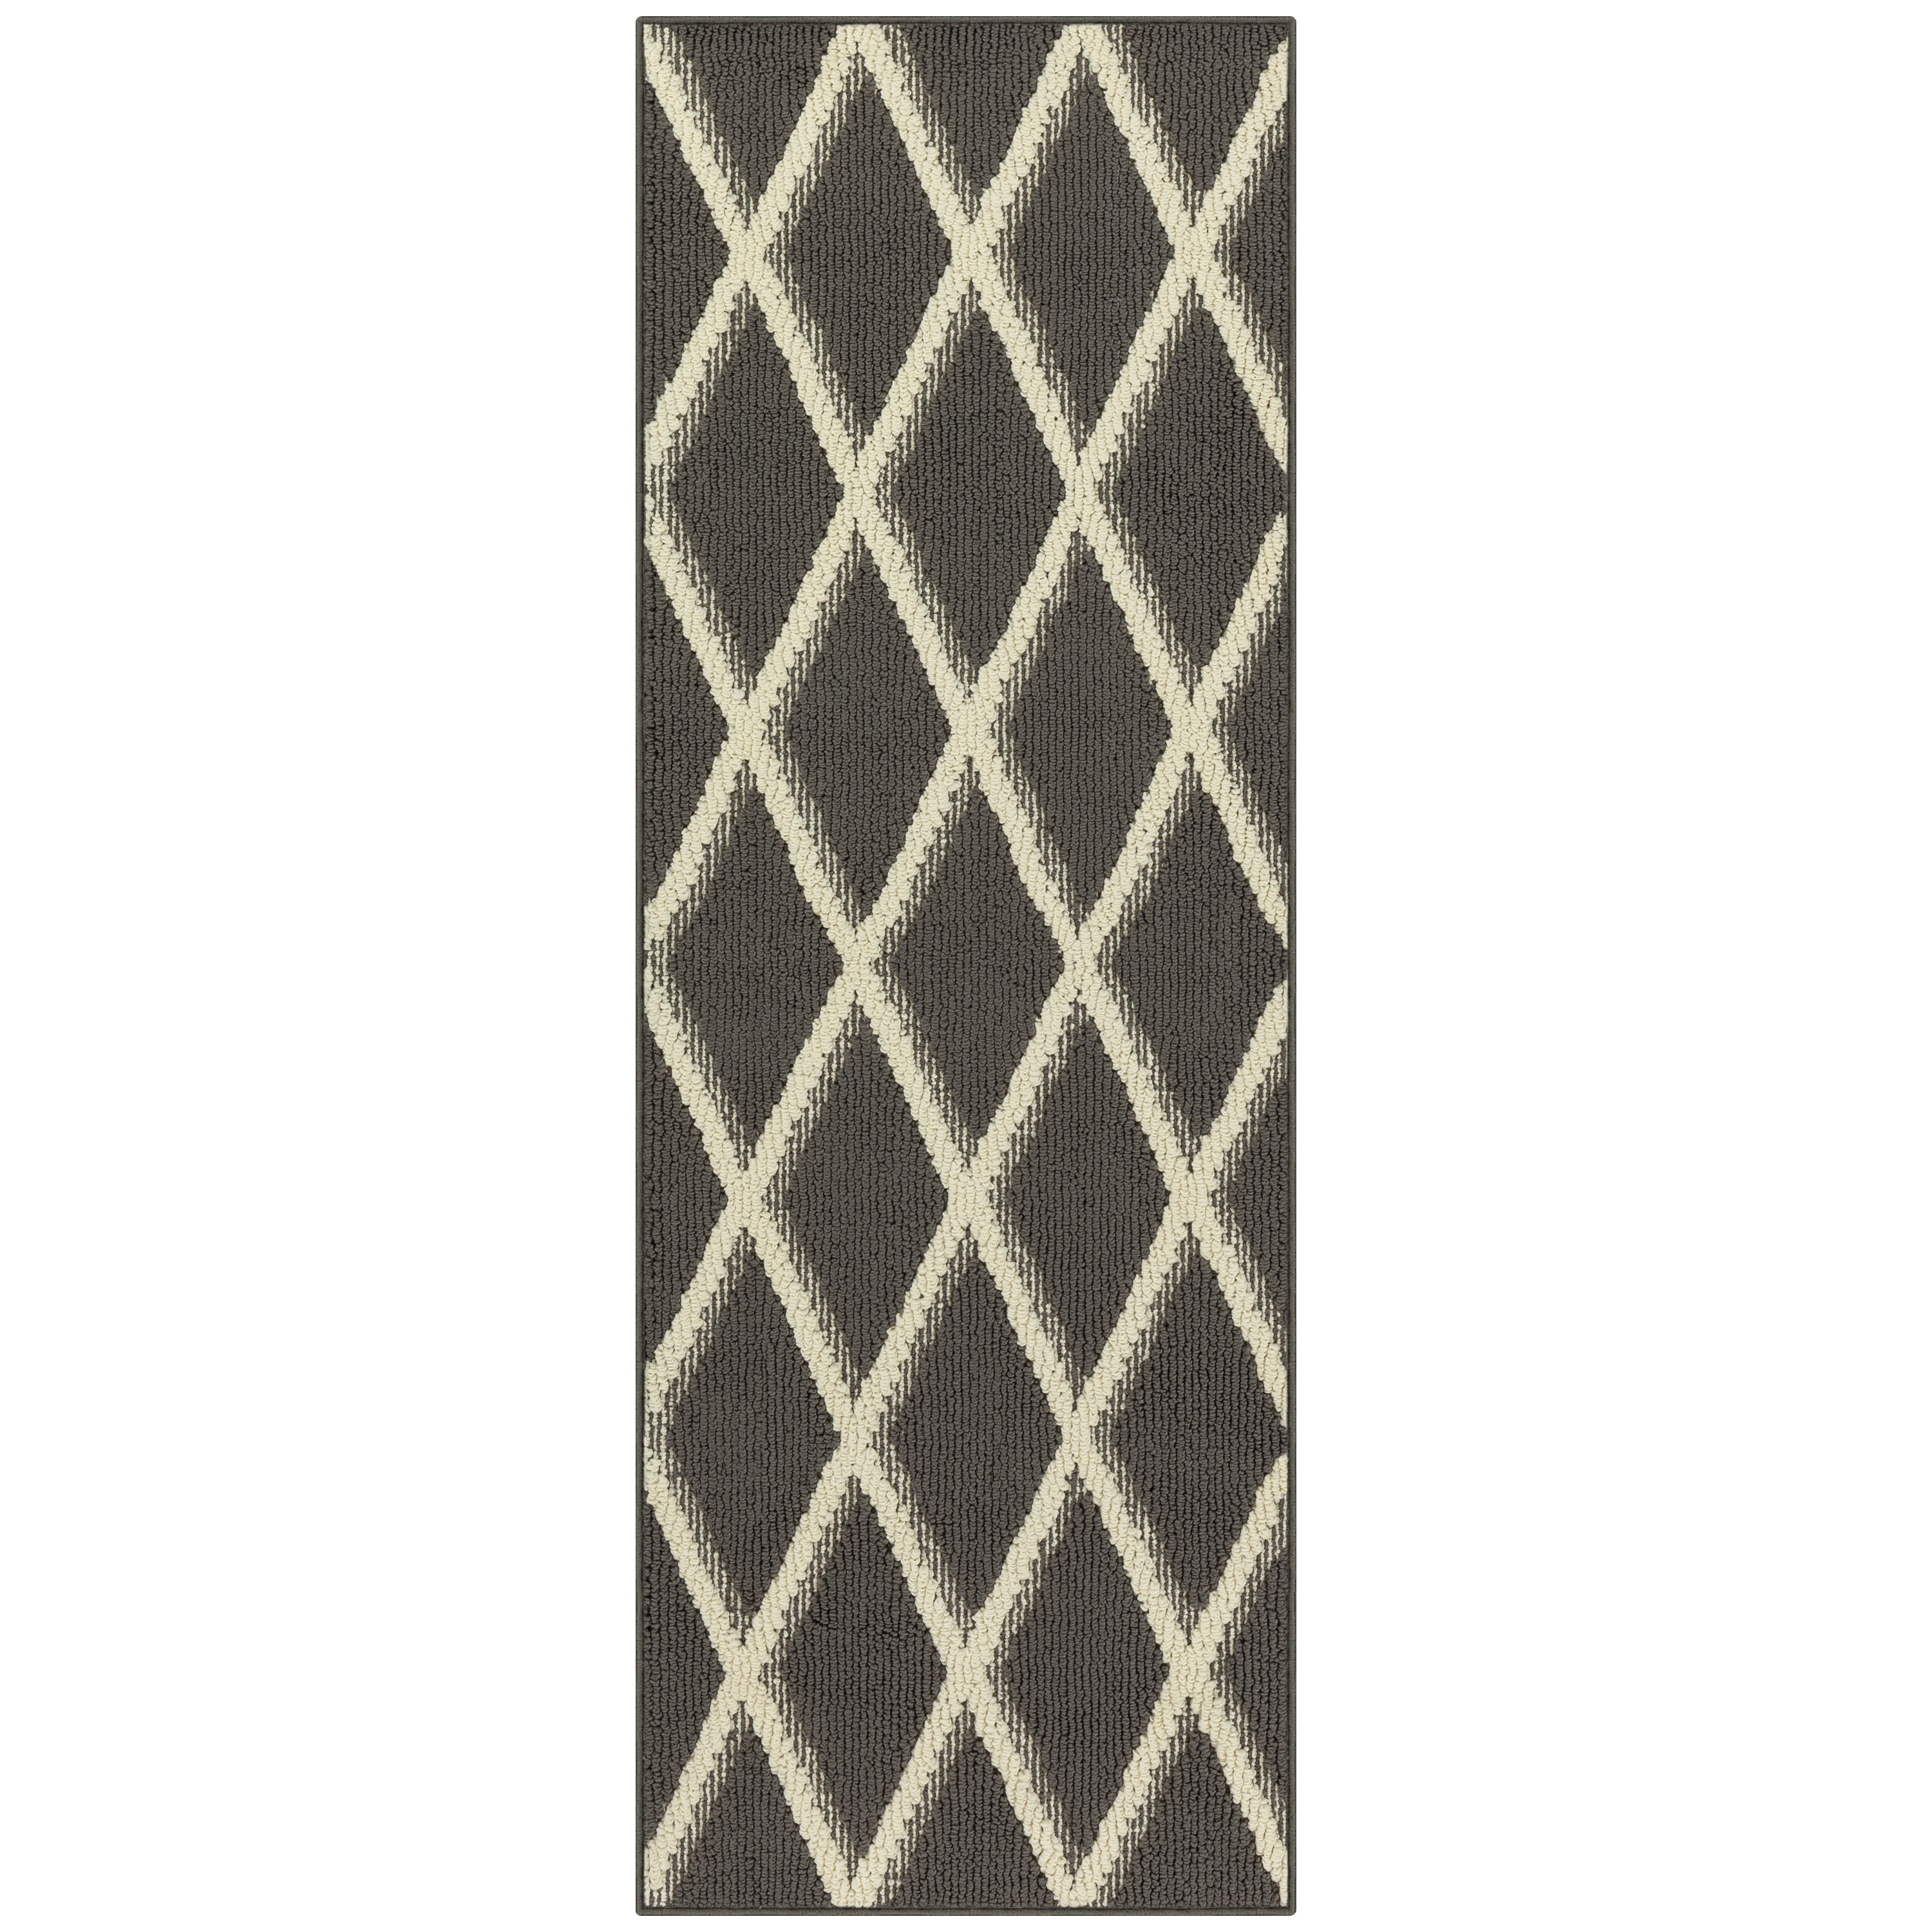 Details about   Omari Geometric Diamond Grey Modern Rug Runner 3 Sizes **FREE DELIVERY** 